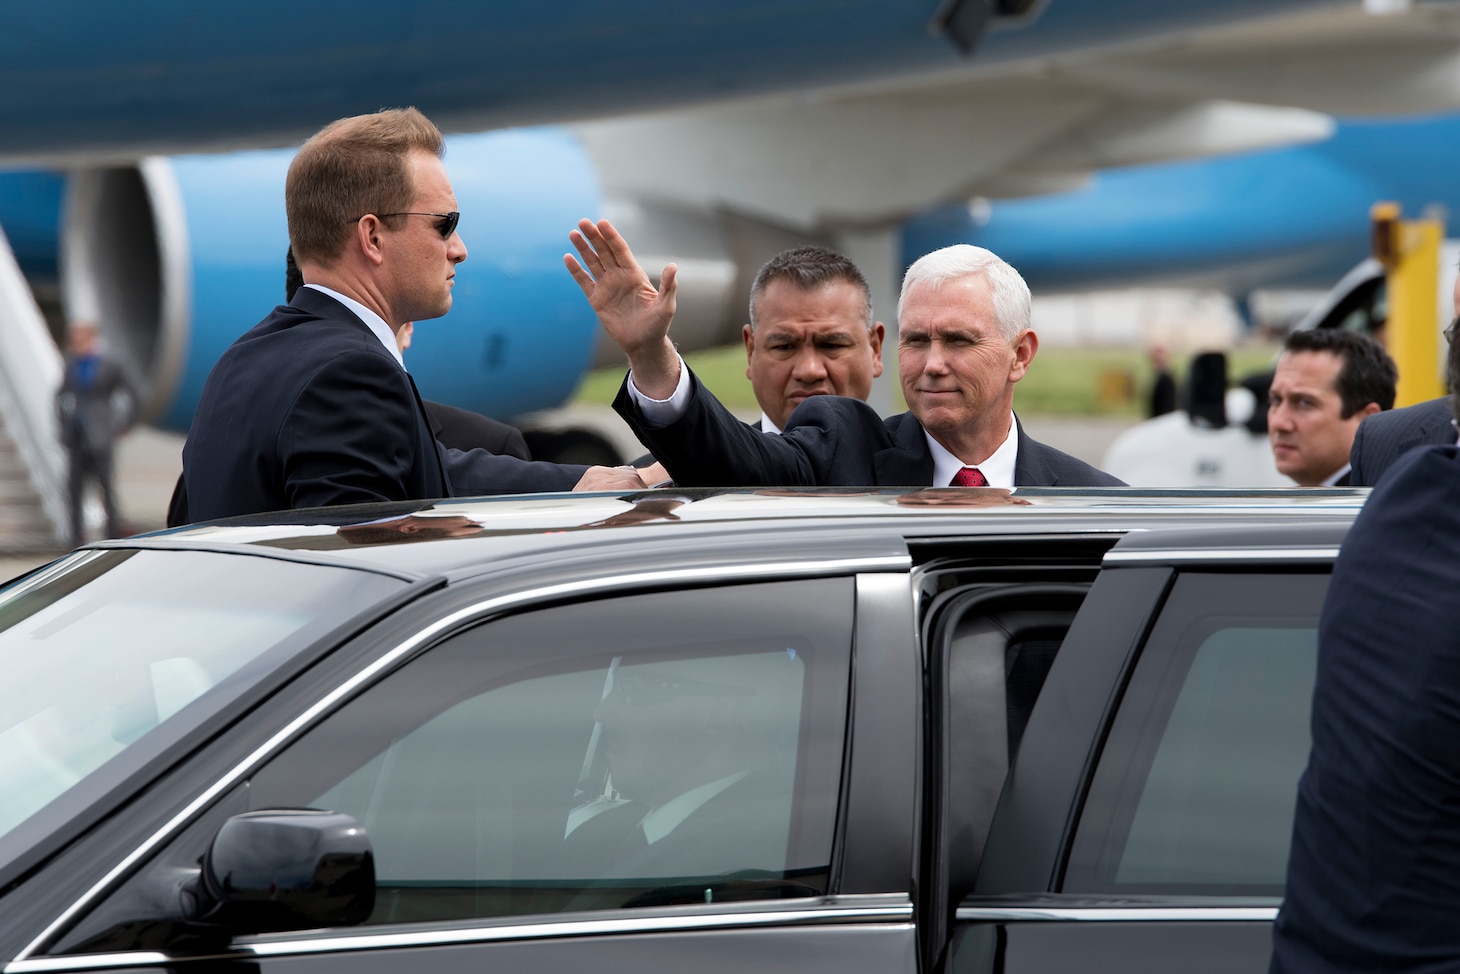 Vice President Mike Pence waves to media before entering his limousine on the flight line at Naval Air Facility Atsugi, Japan, April 18, 2017. The stop marked Pence’s first official visit to Japan as Vice President. During his trip, the Vice President will emphasize President Trump's continued commitment to U.S. alliances and partnerships in the Asia-Pacific region, highlight the Administration's economic agenda, and underscore America's support for our troops at home and abroad.